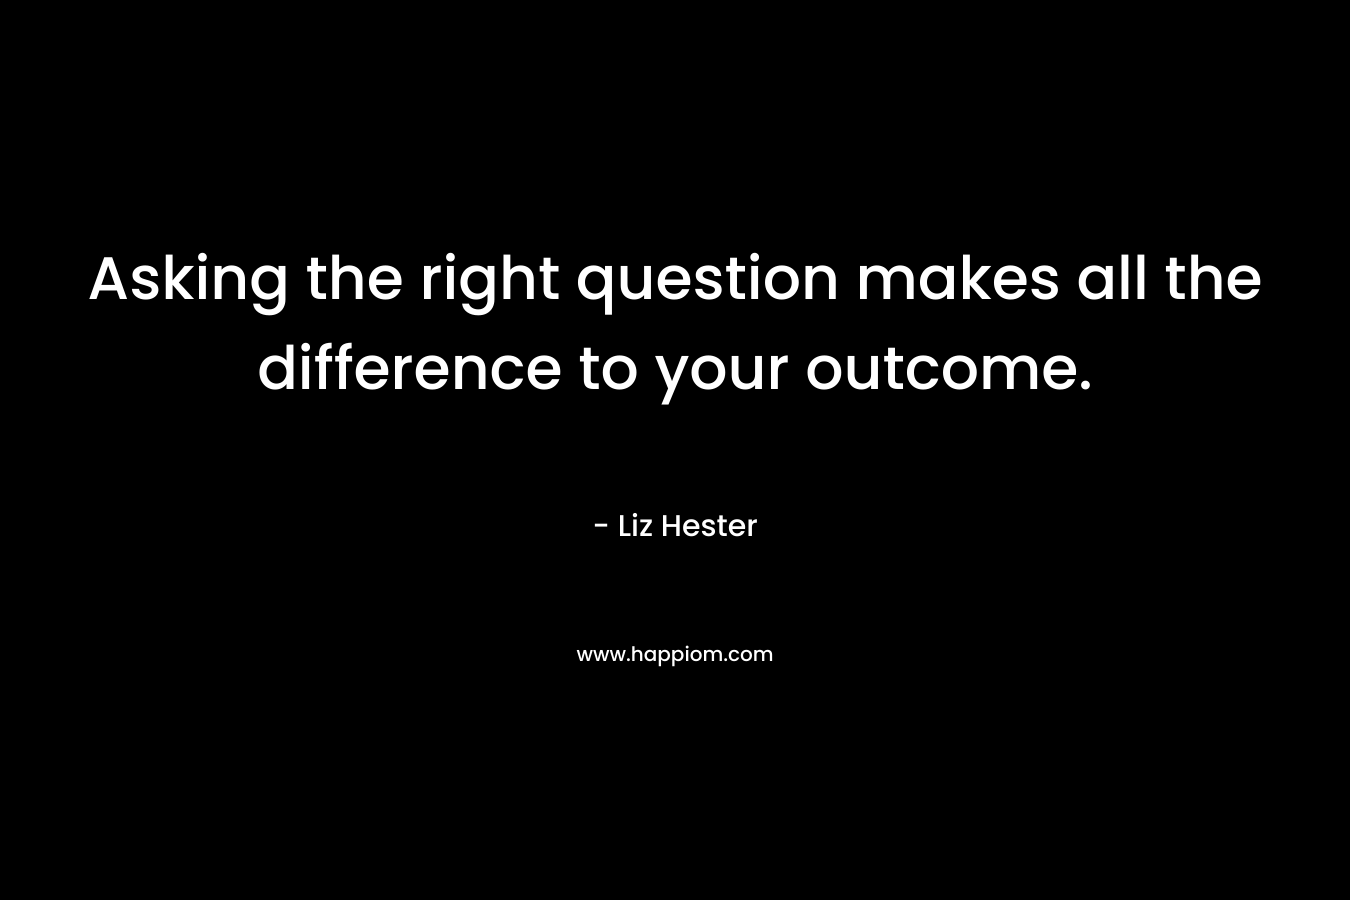 Asking the right question makes all the difference to your outcome.